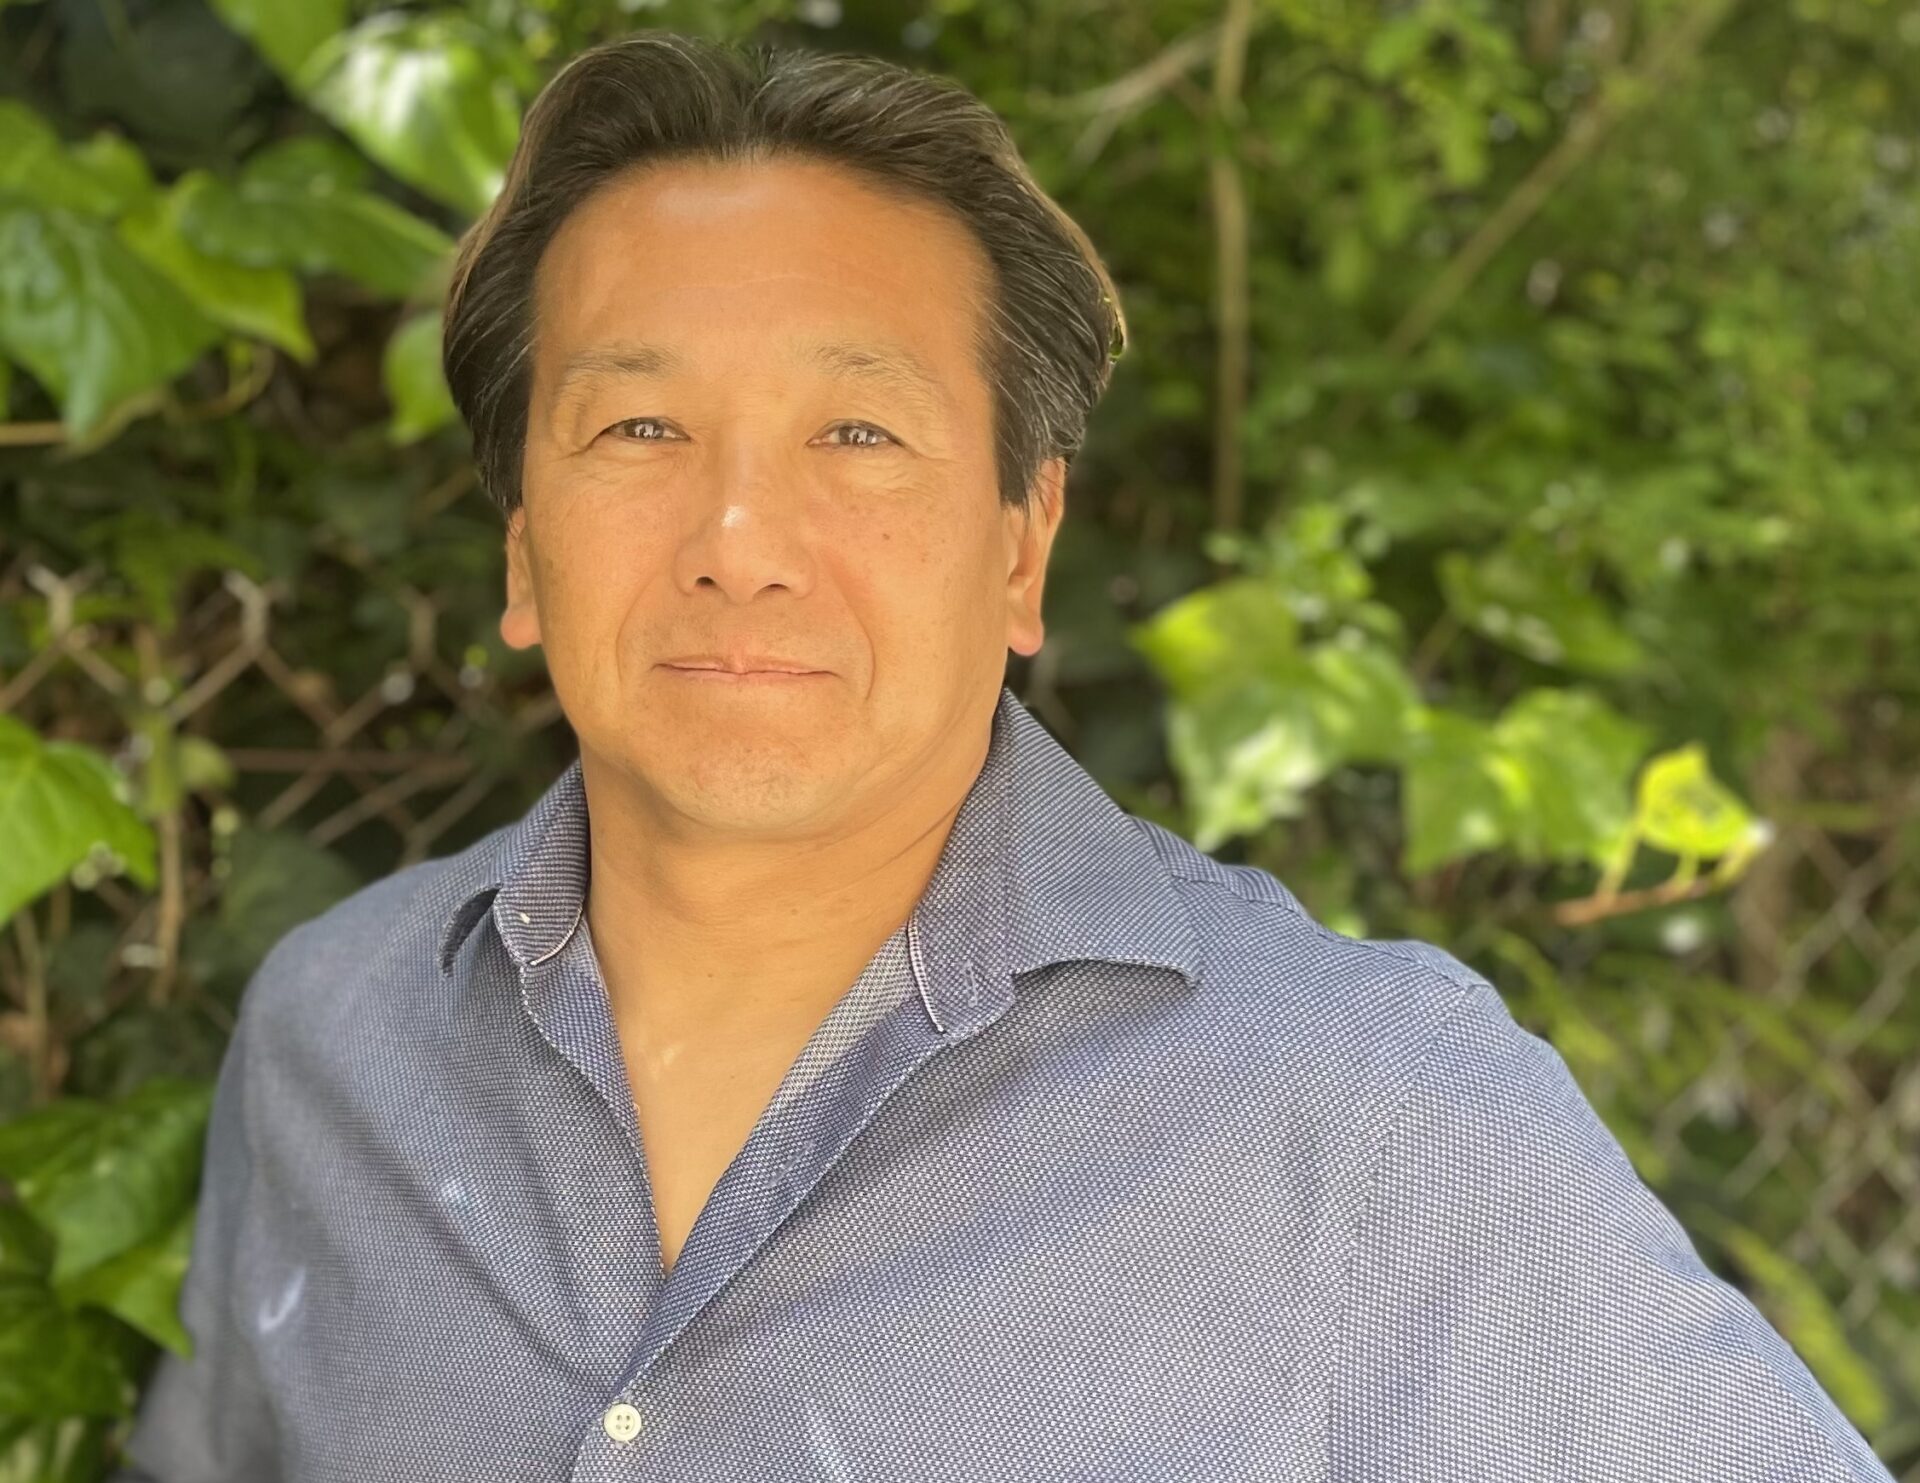 A man wearing a blue button-up shirt posing for the camera in front of trees, hands on his hips.